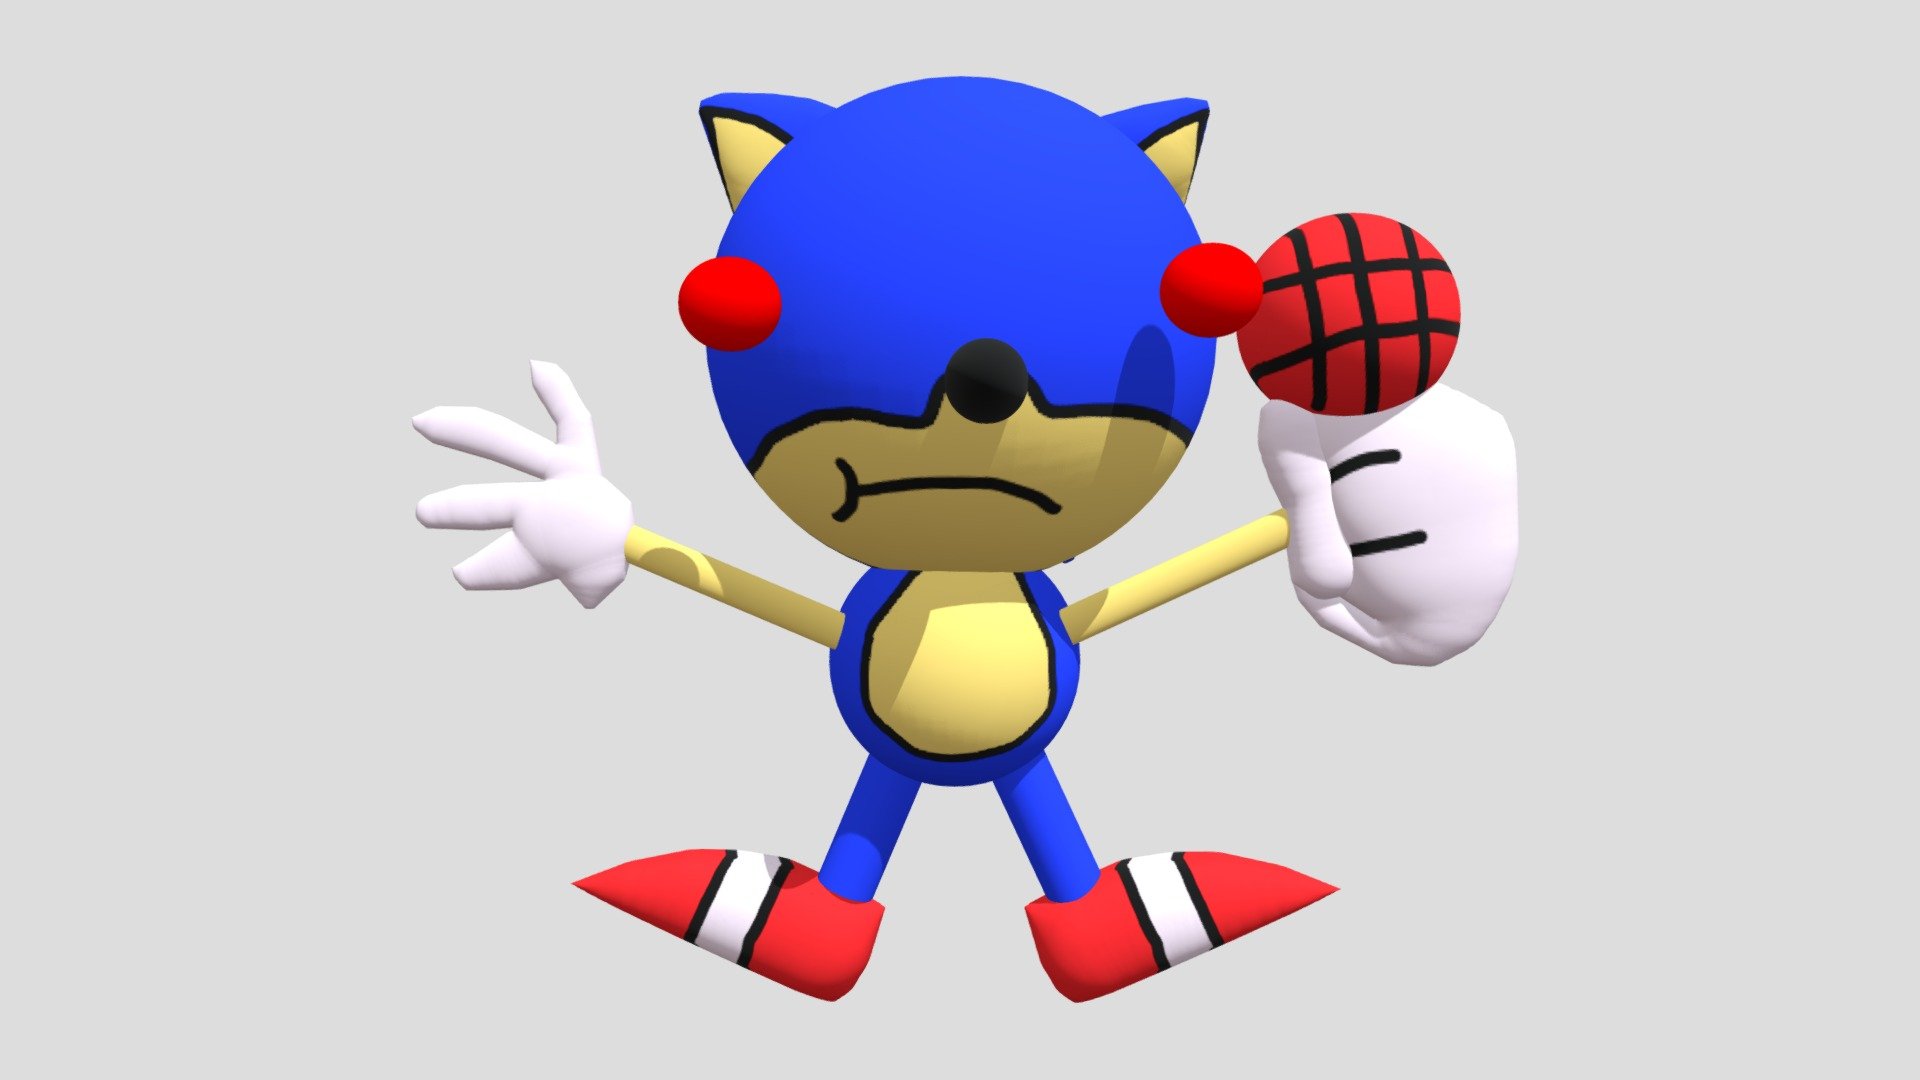 Sunky.MPEG (Vs. Sonic.Exe) - Download Free 3D model by XanderDaGamer  (@XanderKartWii) [619d859]